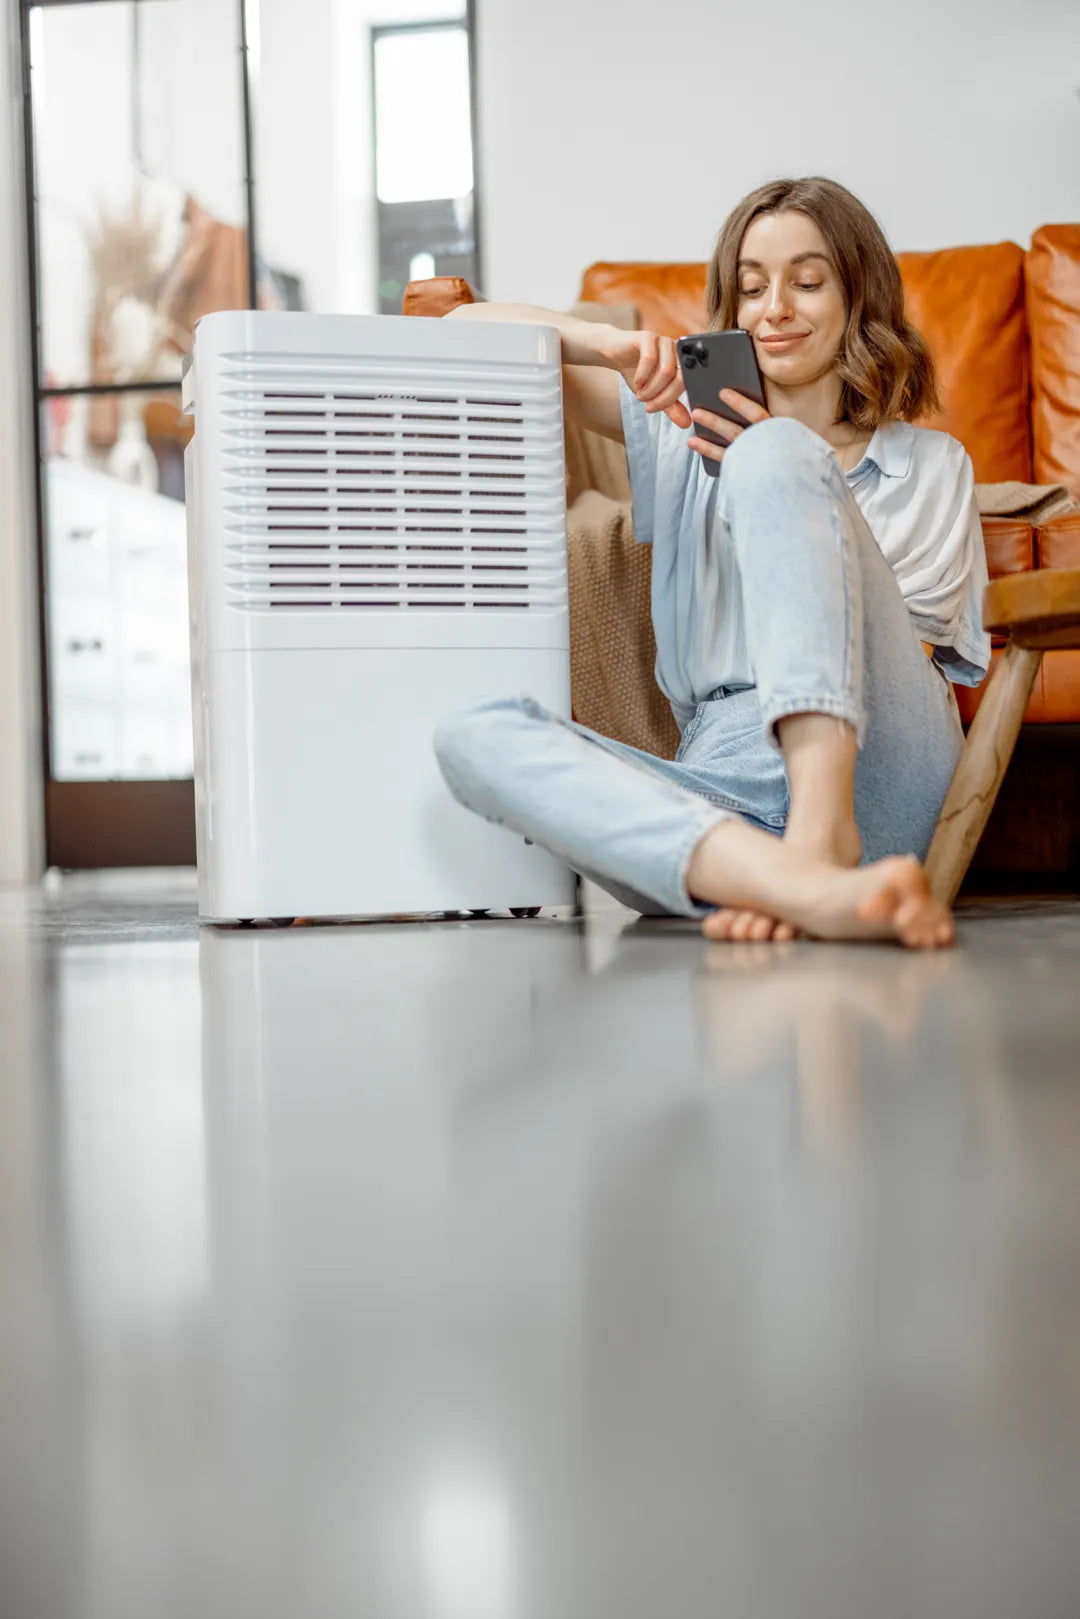 A woman who installed a dehumidifier to reduce the humidity in a room.